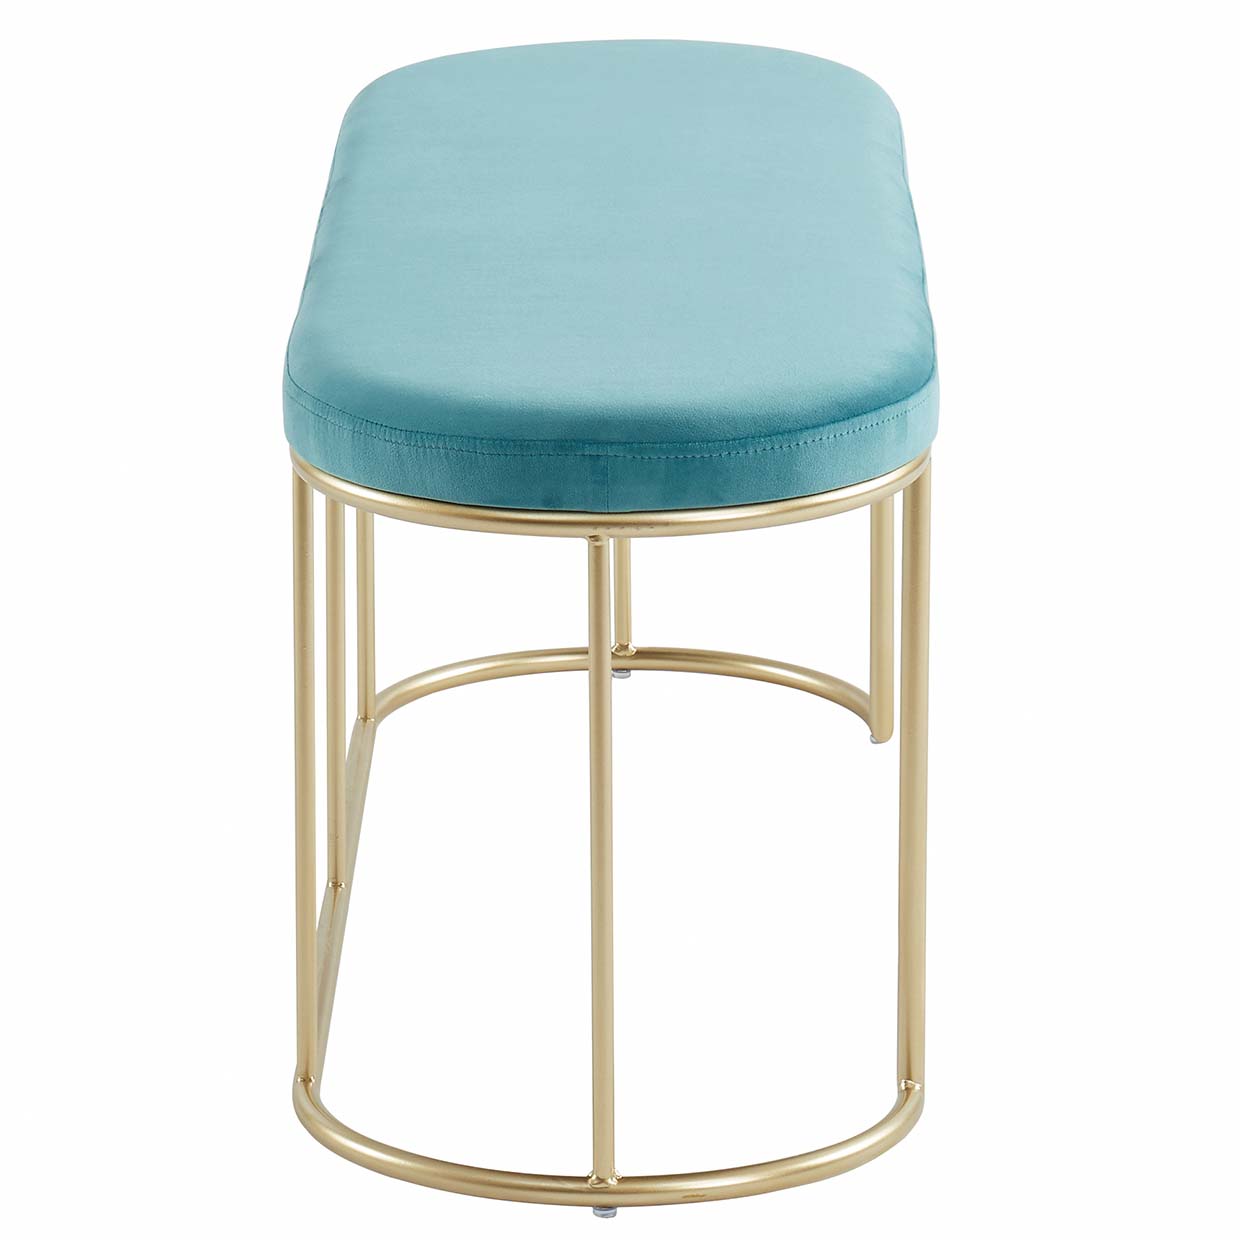 Perla Bench in Teal/Gold - Dreamart Gallery